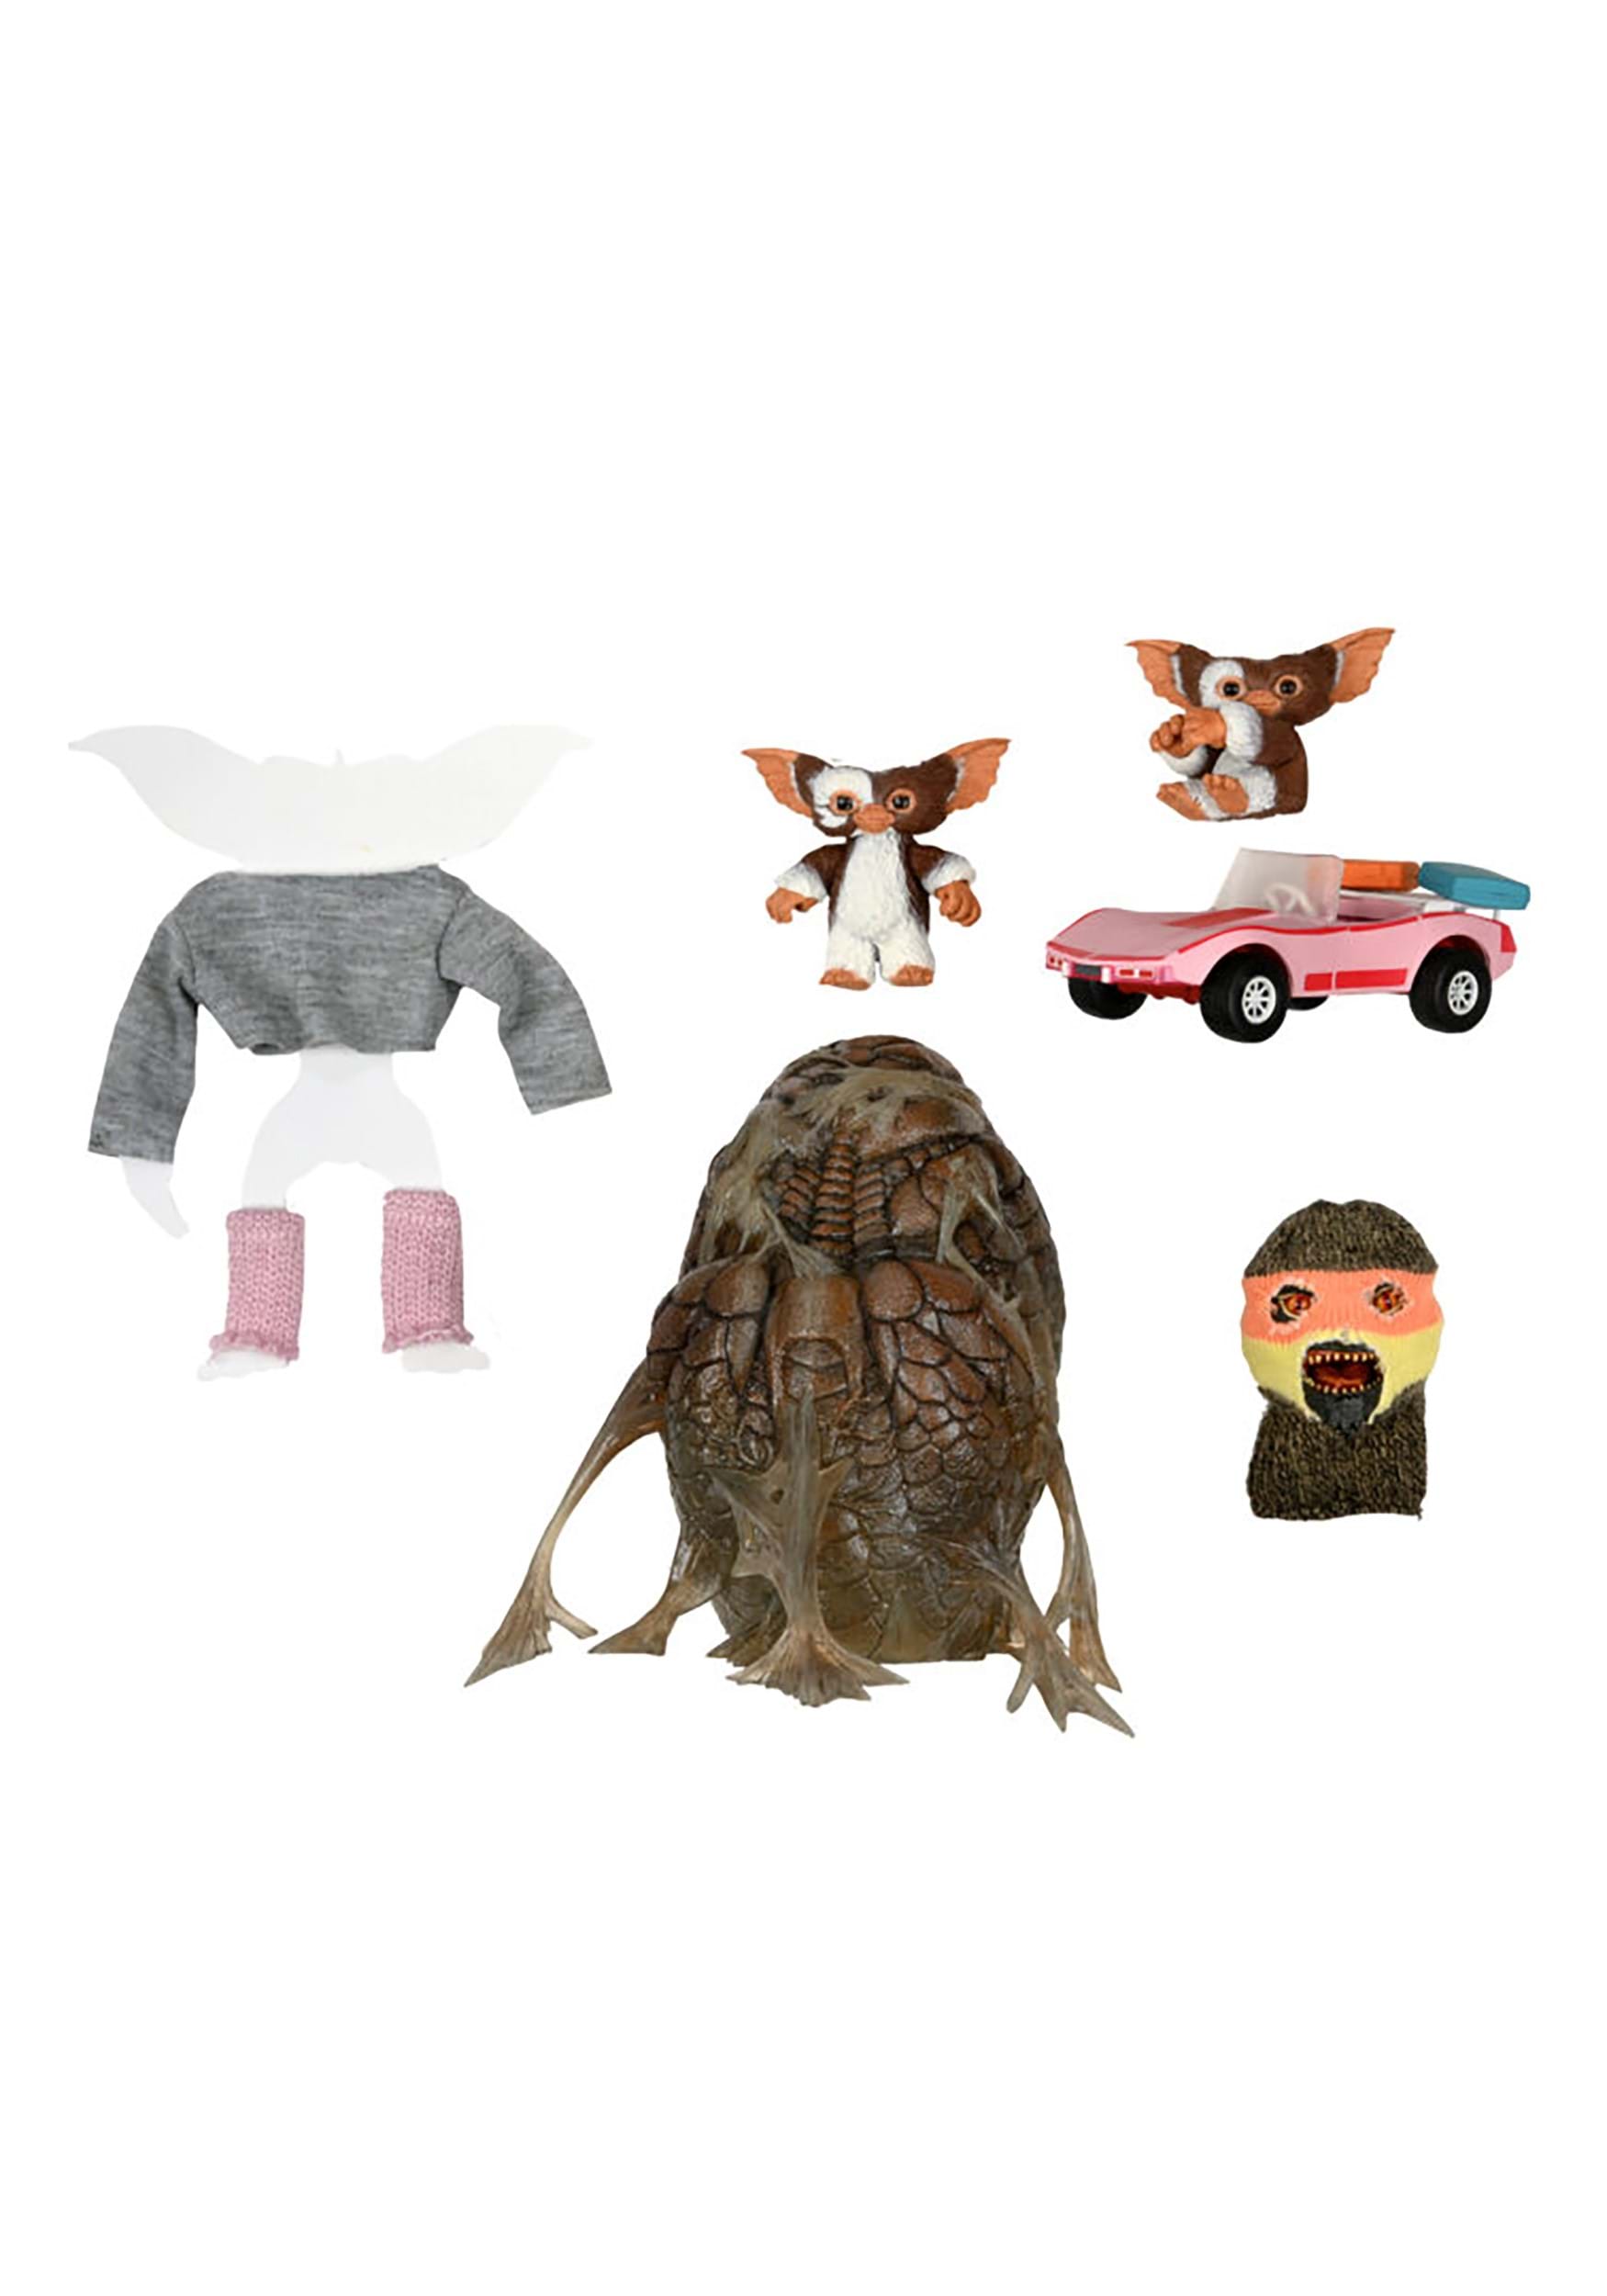 1984 Gremlins Accessory Pack